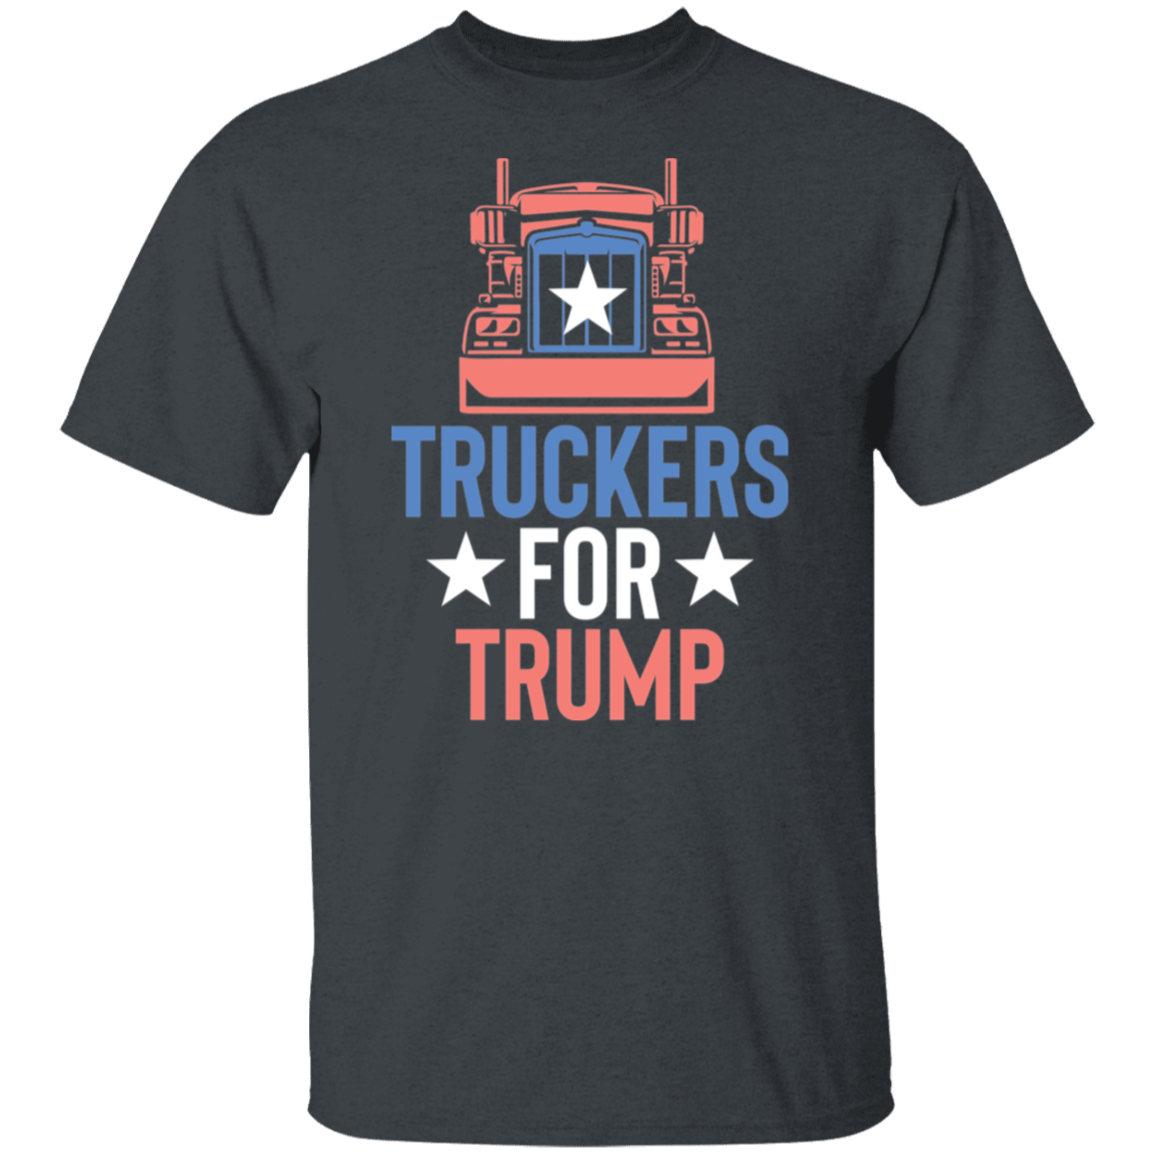 Truckers For Trump